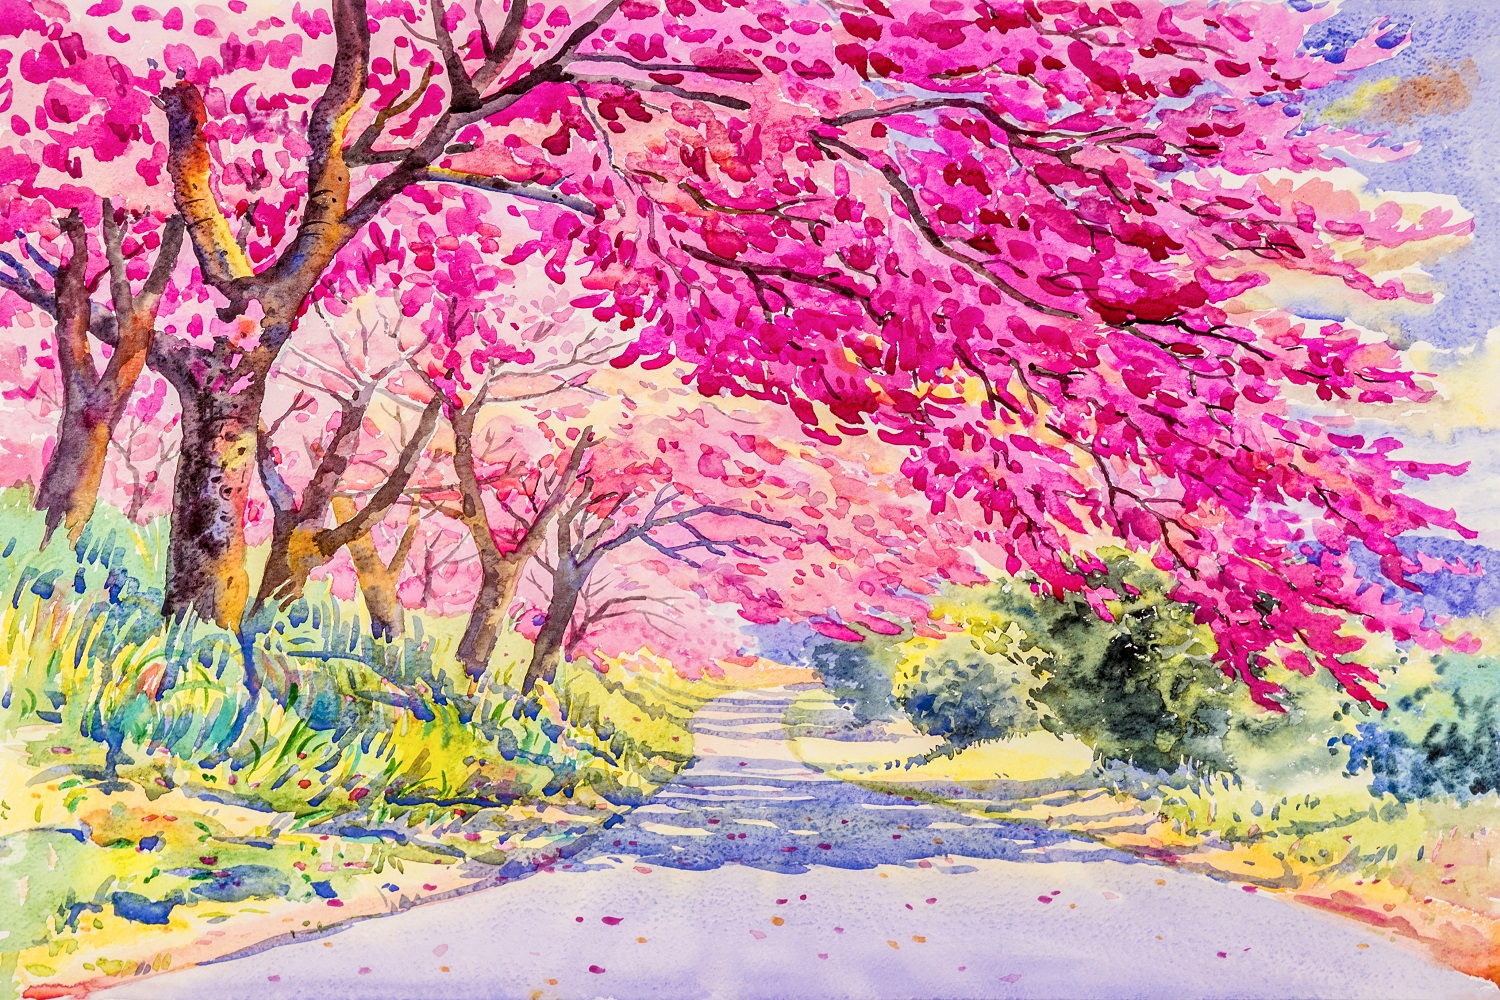 Painting pink color of wild himalayan cherry flower